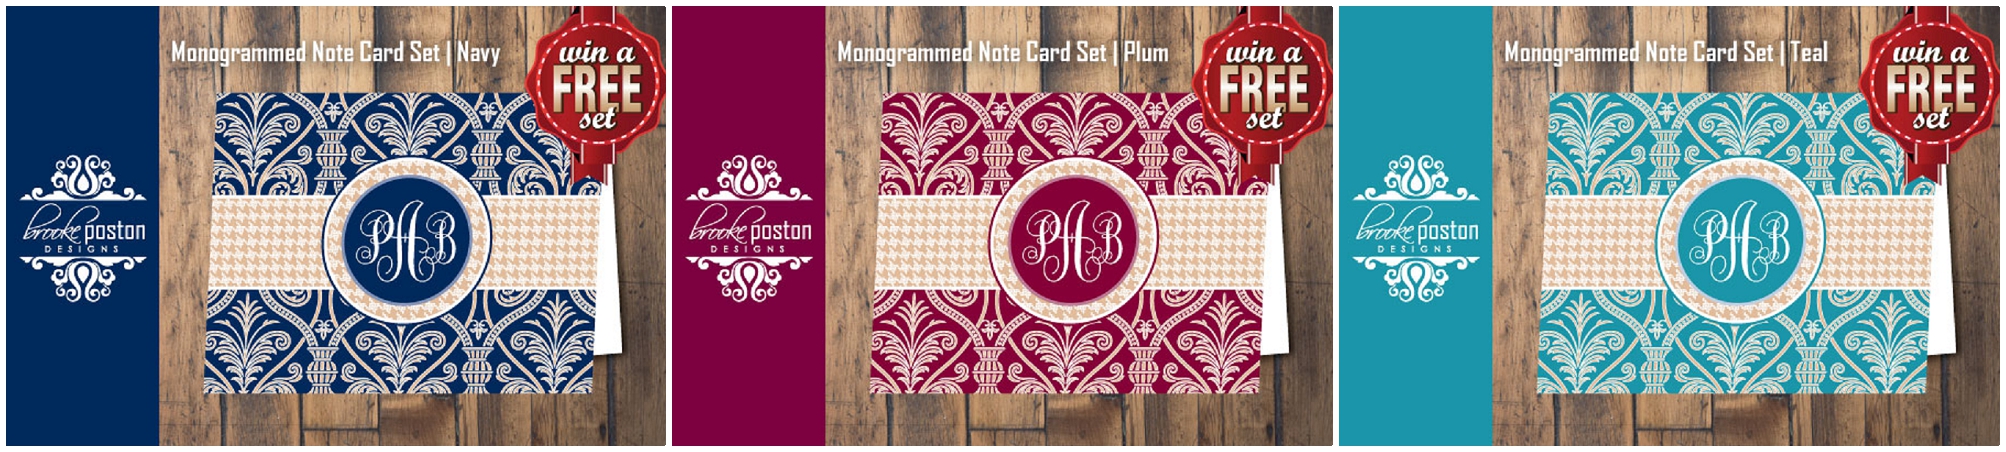 Brooke Poston Designs – Win a Free set of monogrammed note cards!